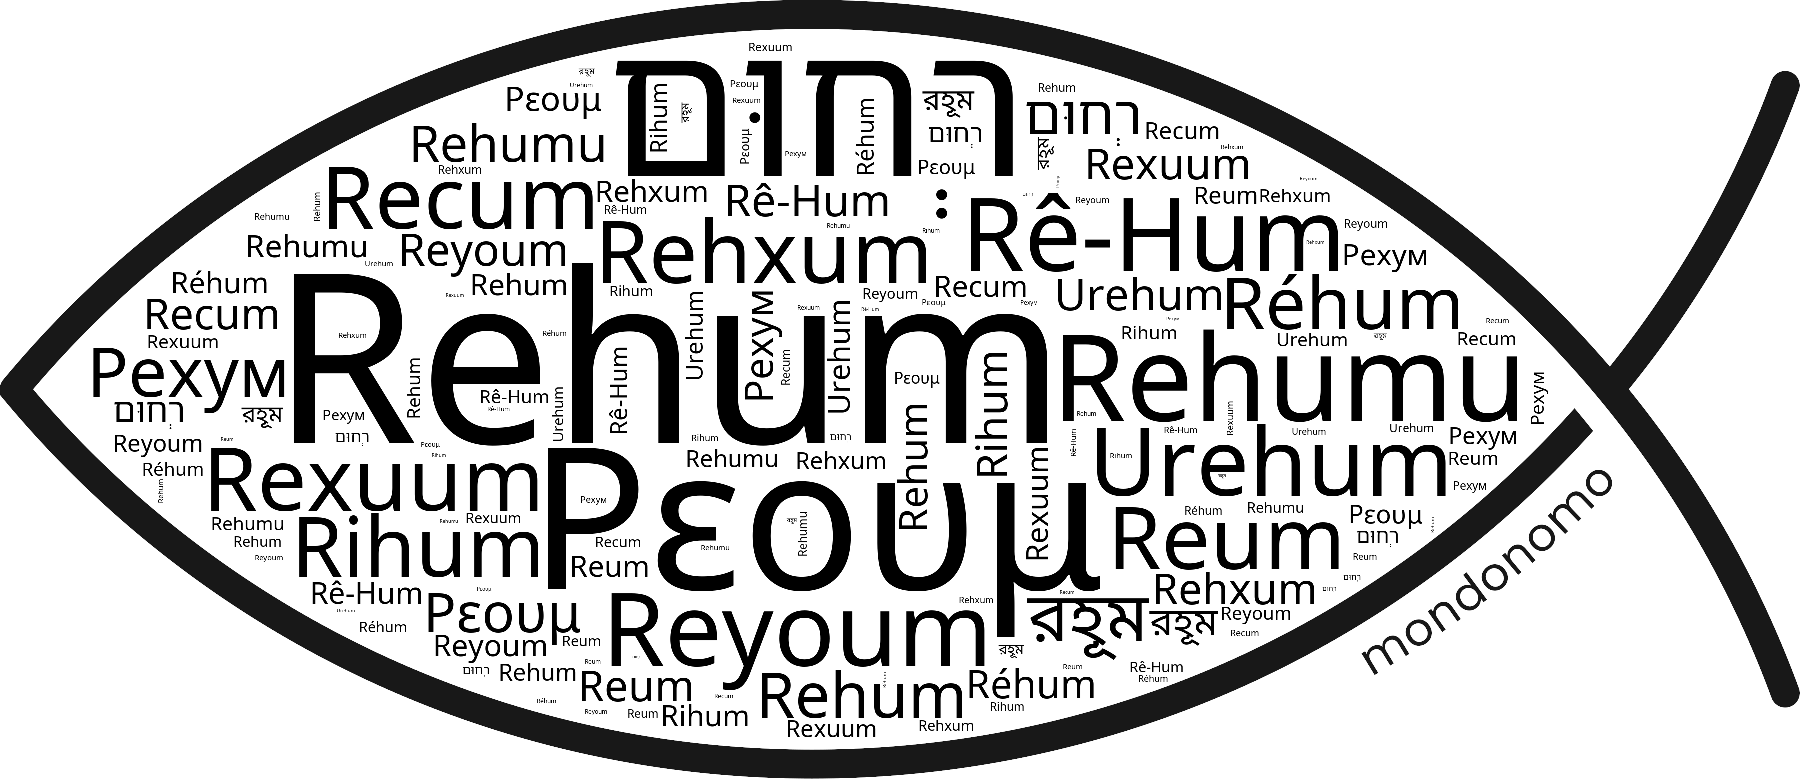 Name Rehum in the world's Bibles